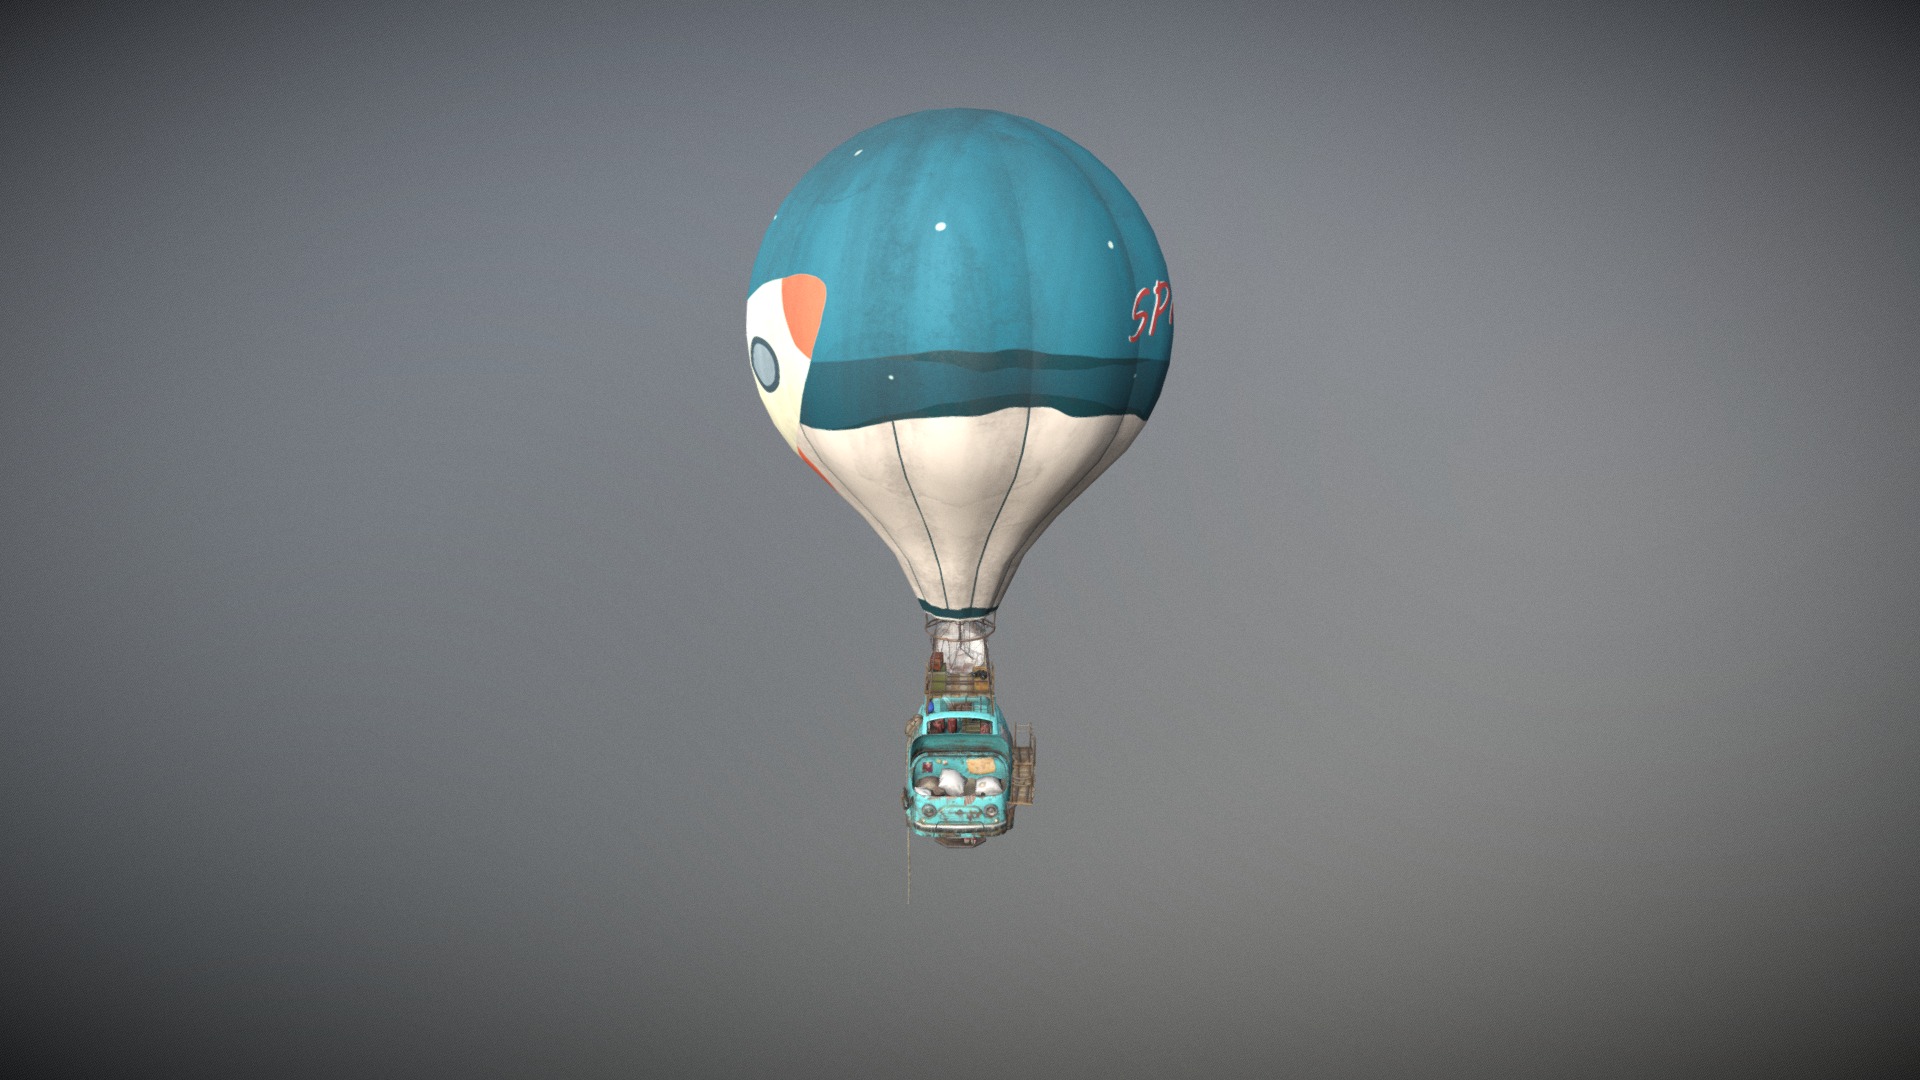 3D model Tiny Fiat 500 - This is a 3D model of the Tiny Fiat 500. The 3D model is about a blue and white balloon.